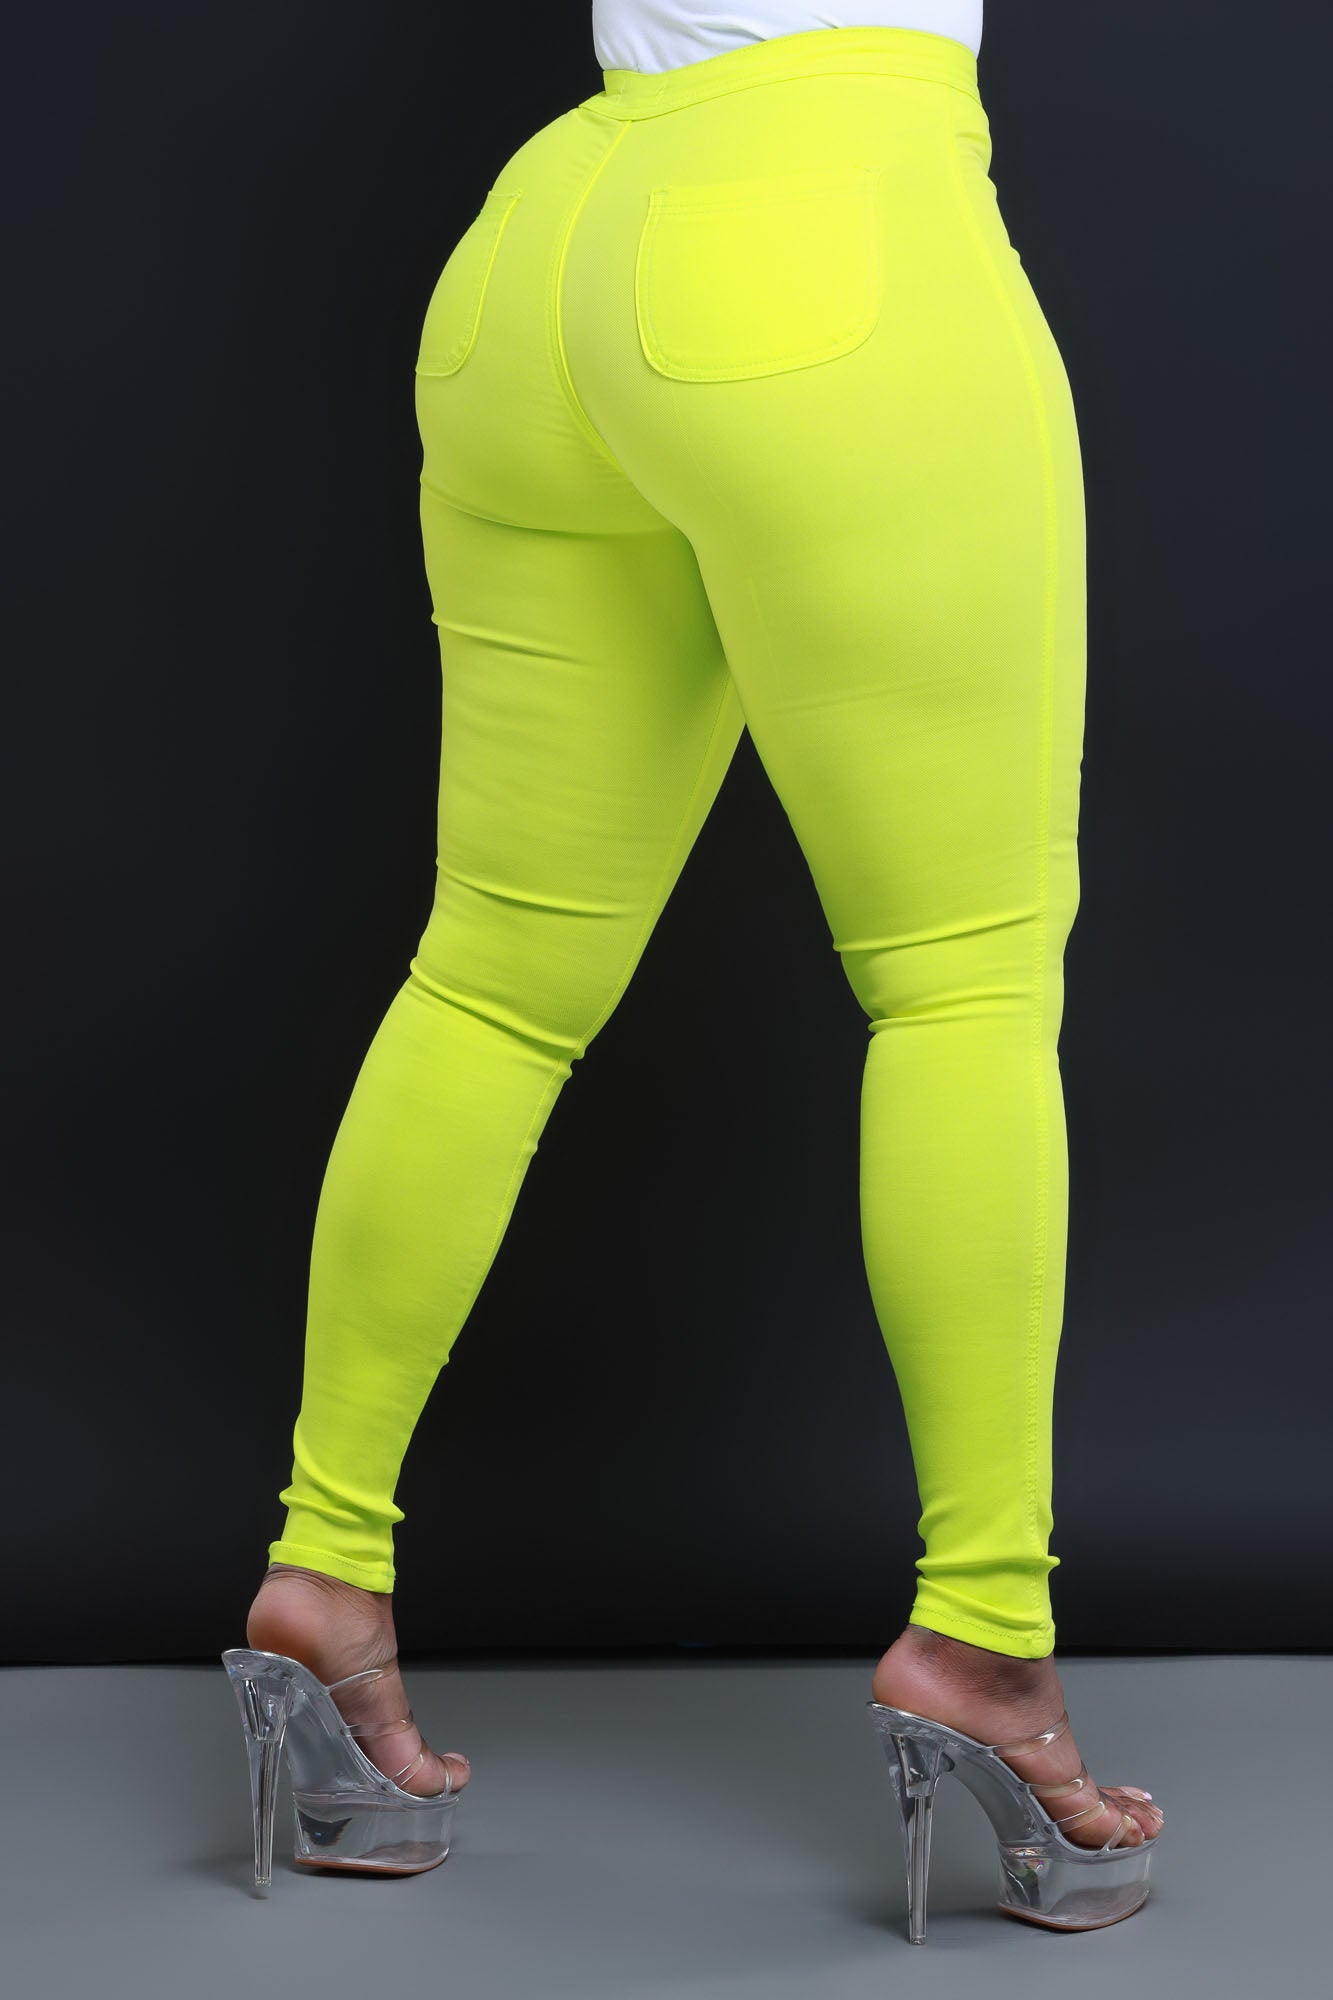 $5 Super Swank High Waist Stretchy Jeans - Neon Yellow